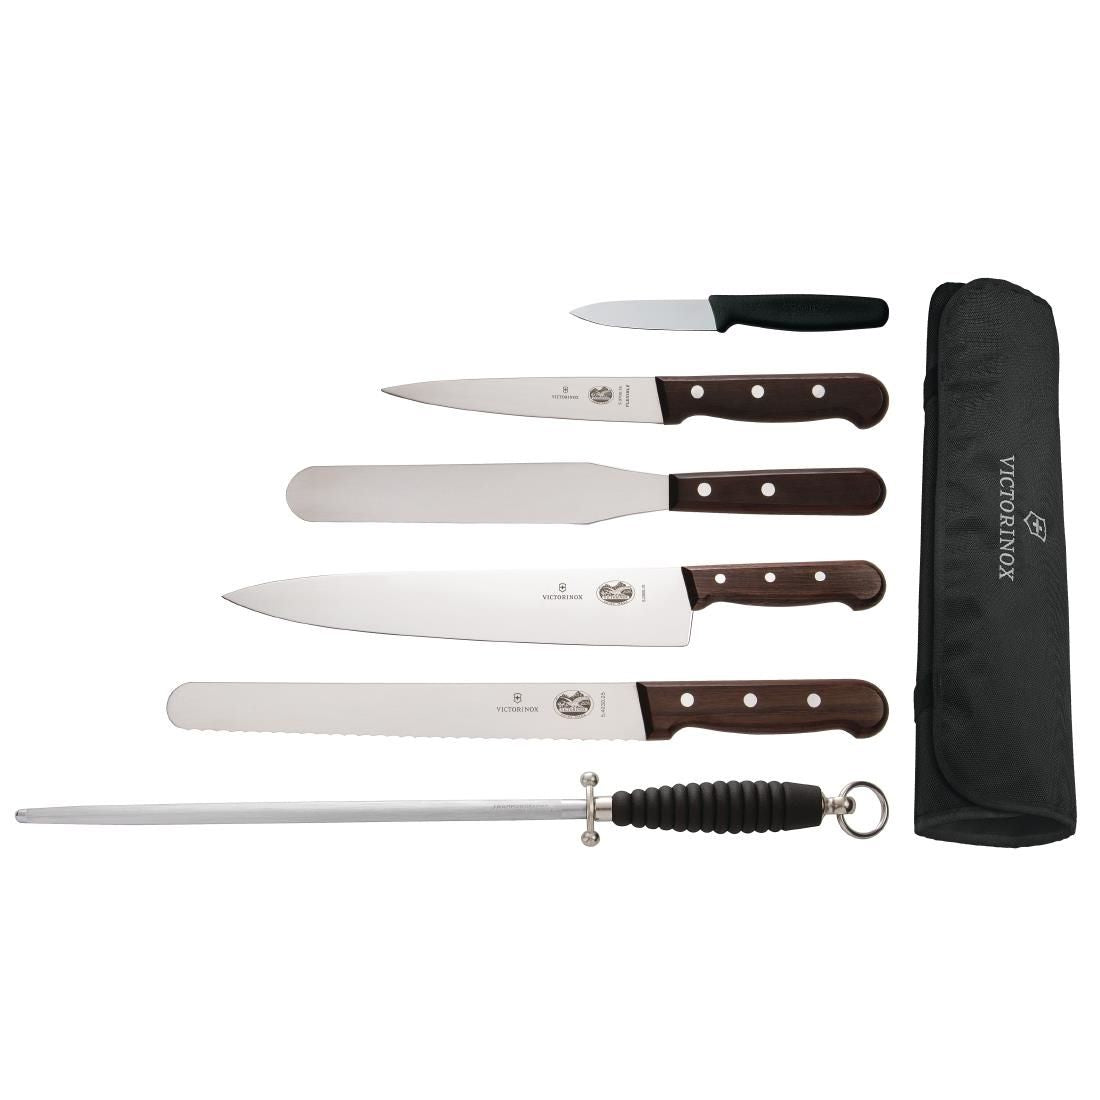 S189 Victorinox 6 Piece Rosewood Knife Set with 25cm Chefs Knife with Wallet